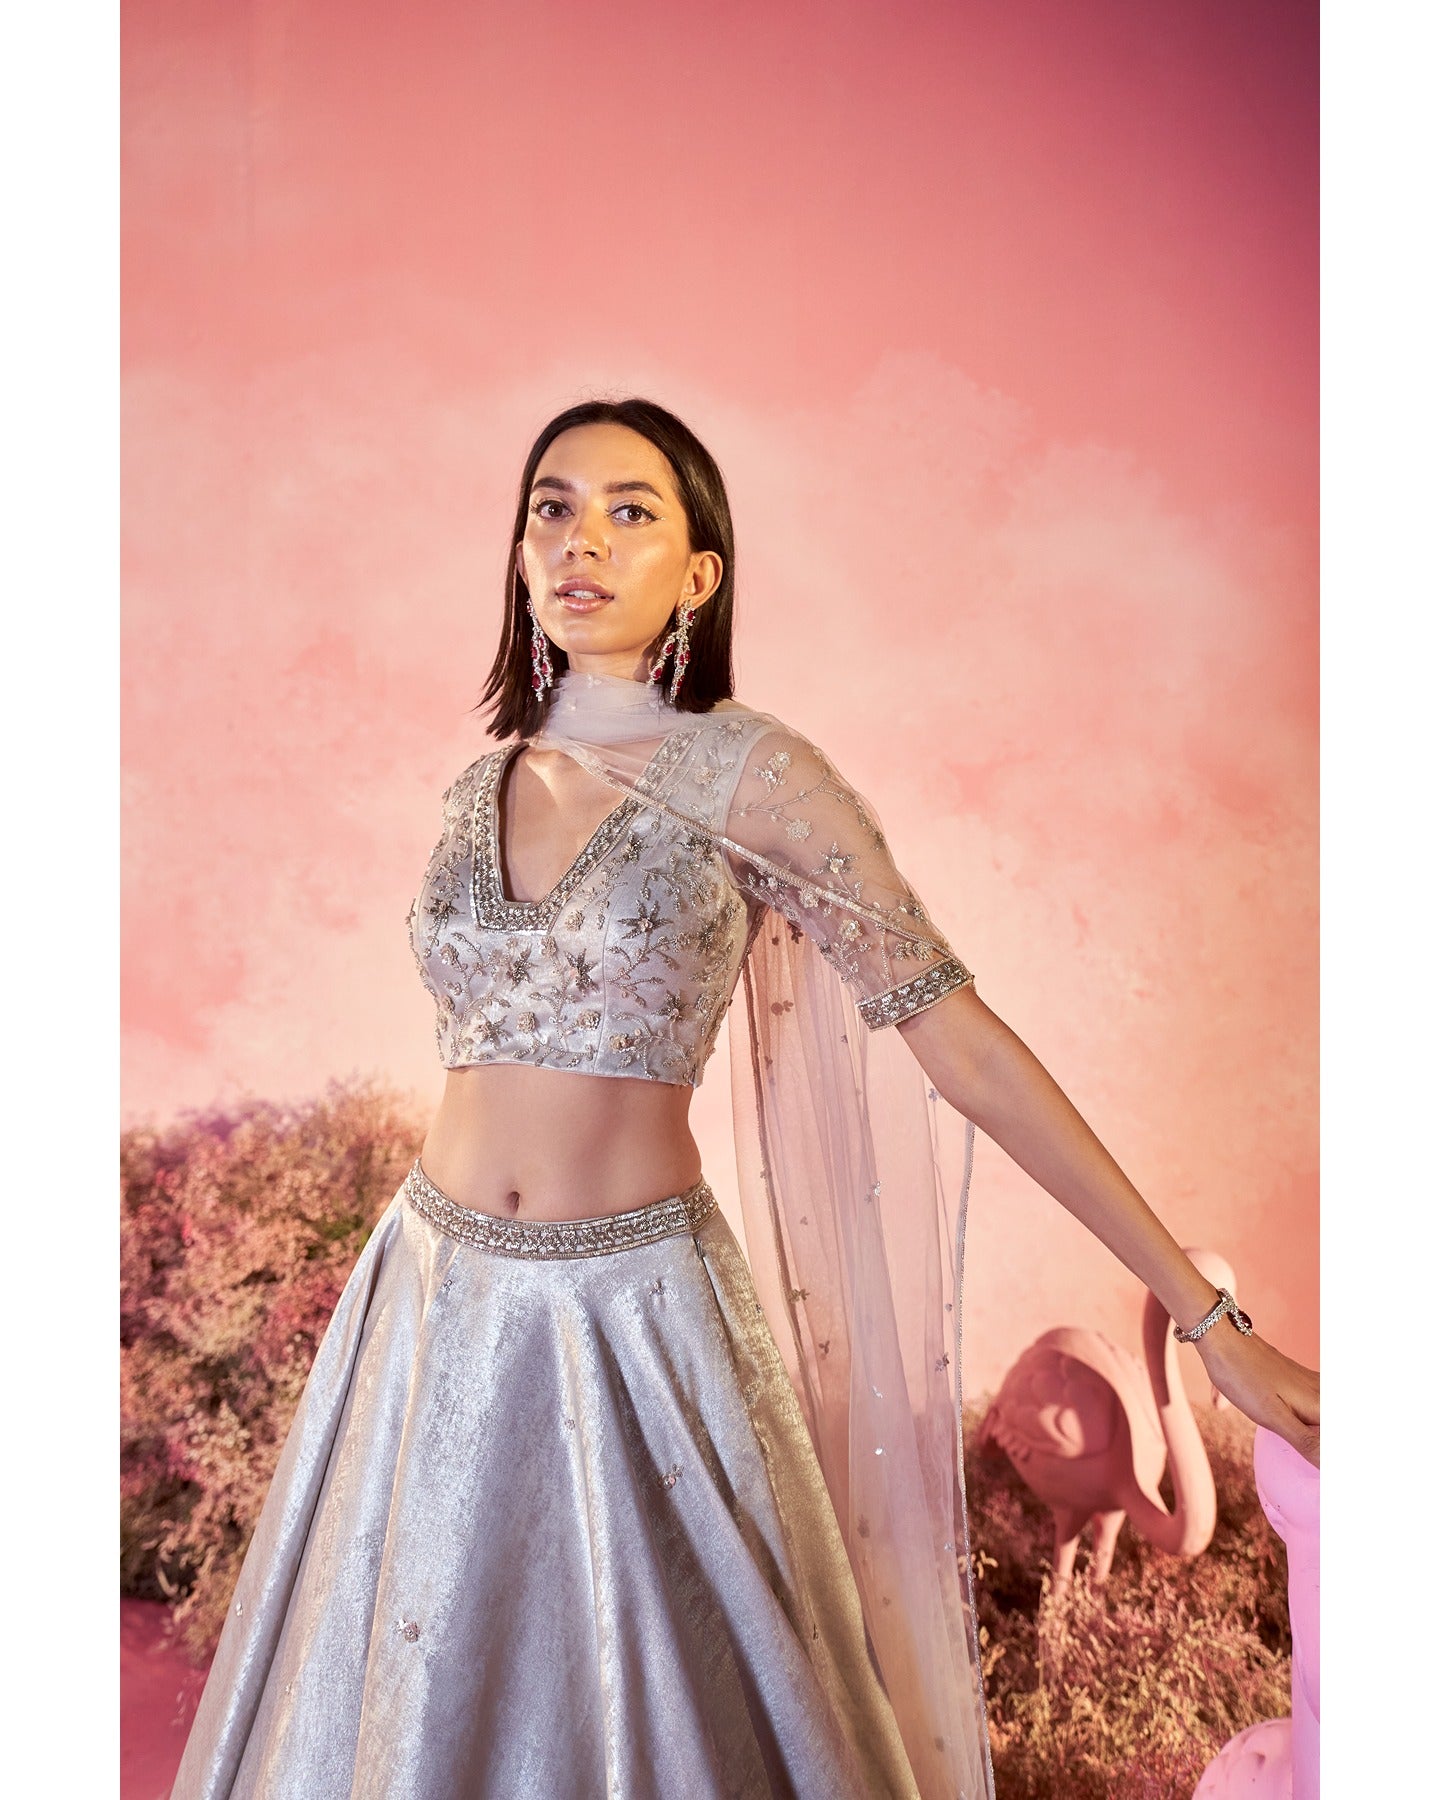 Bridal lehenga adorned with hand-embroidered geometric patterns and sequin embellishments.